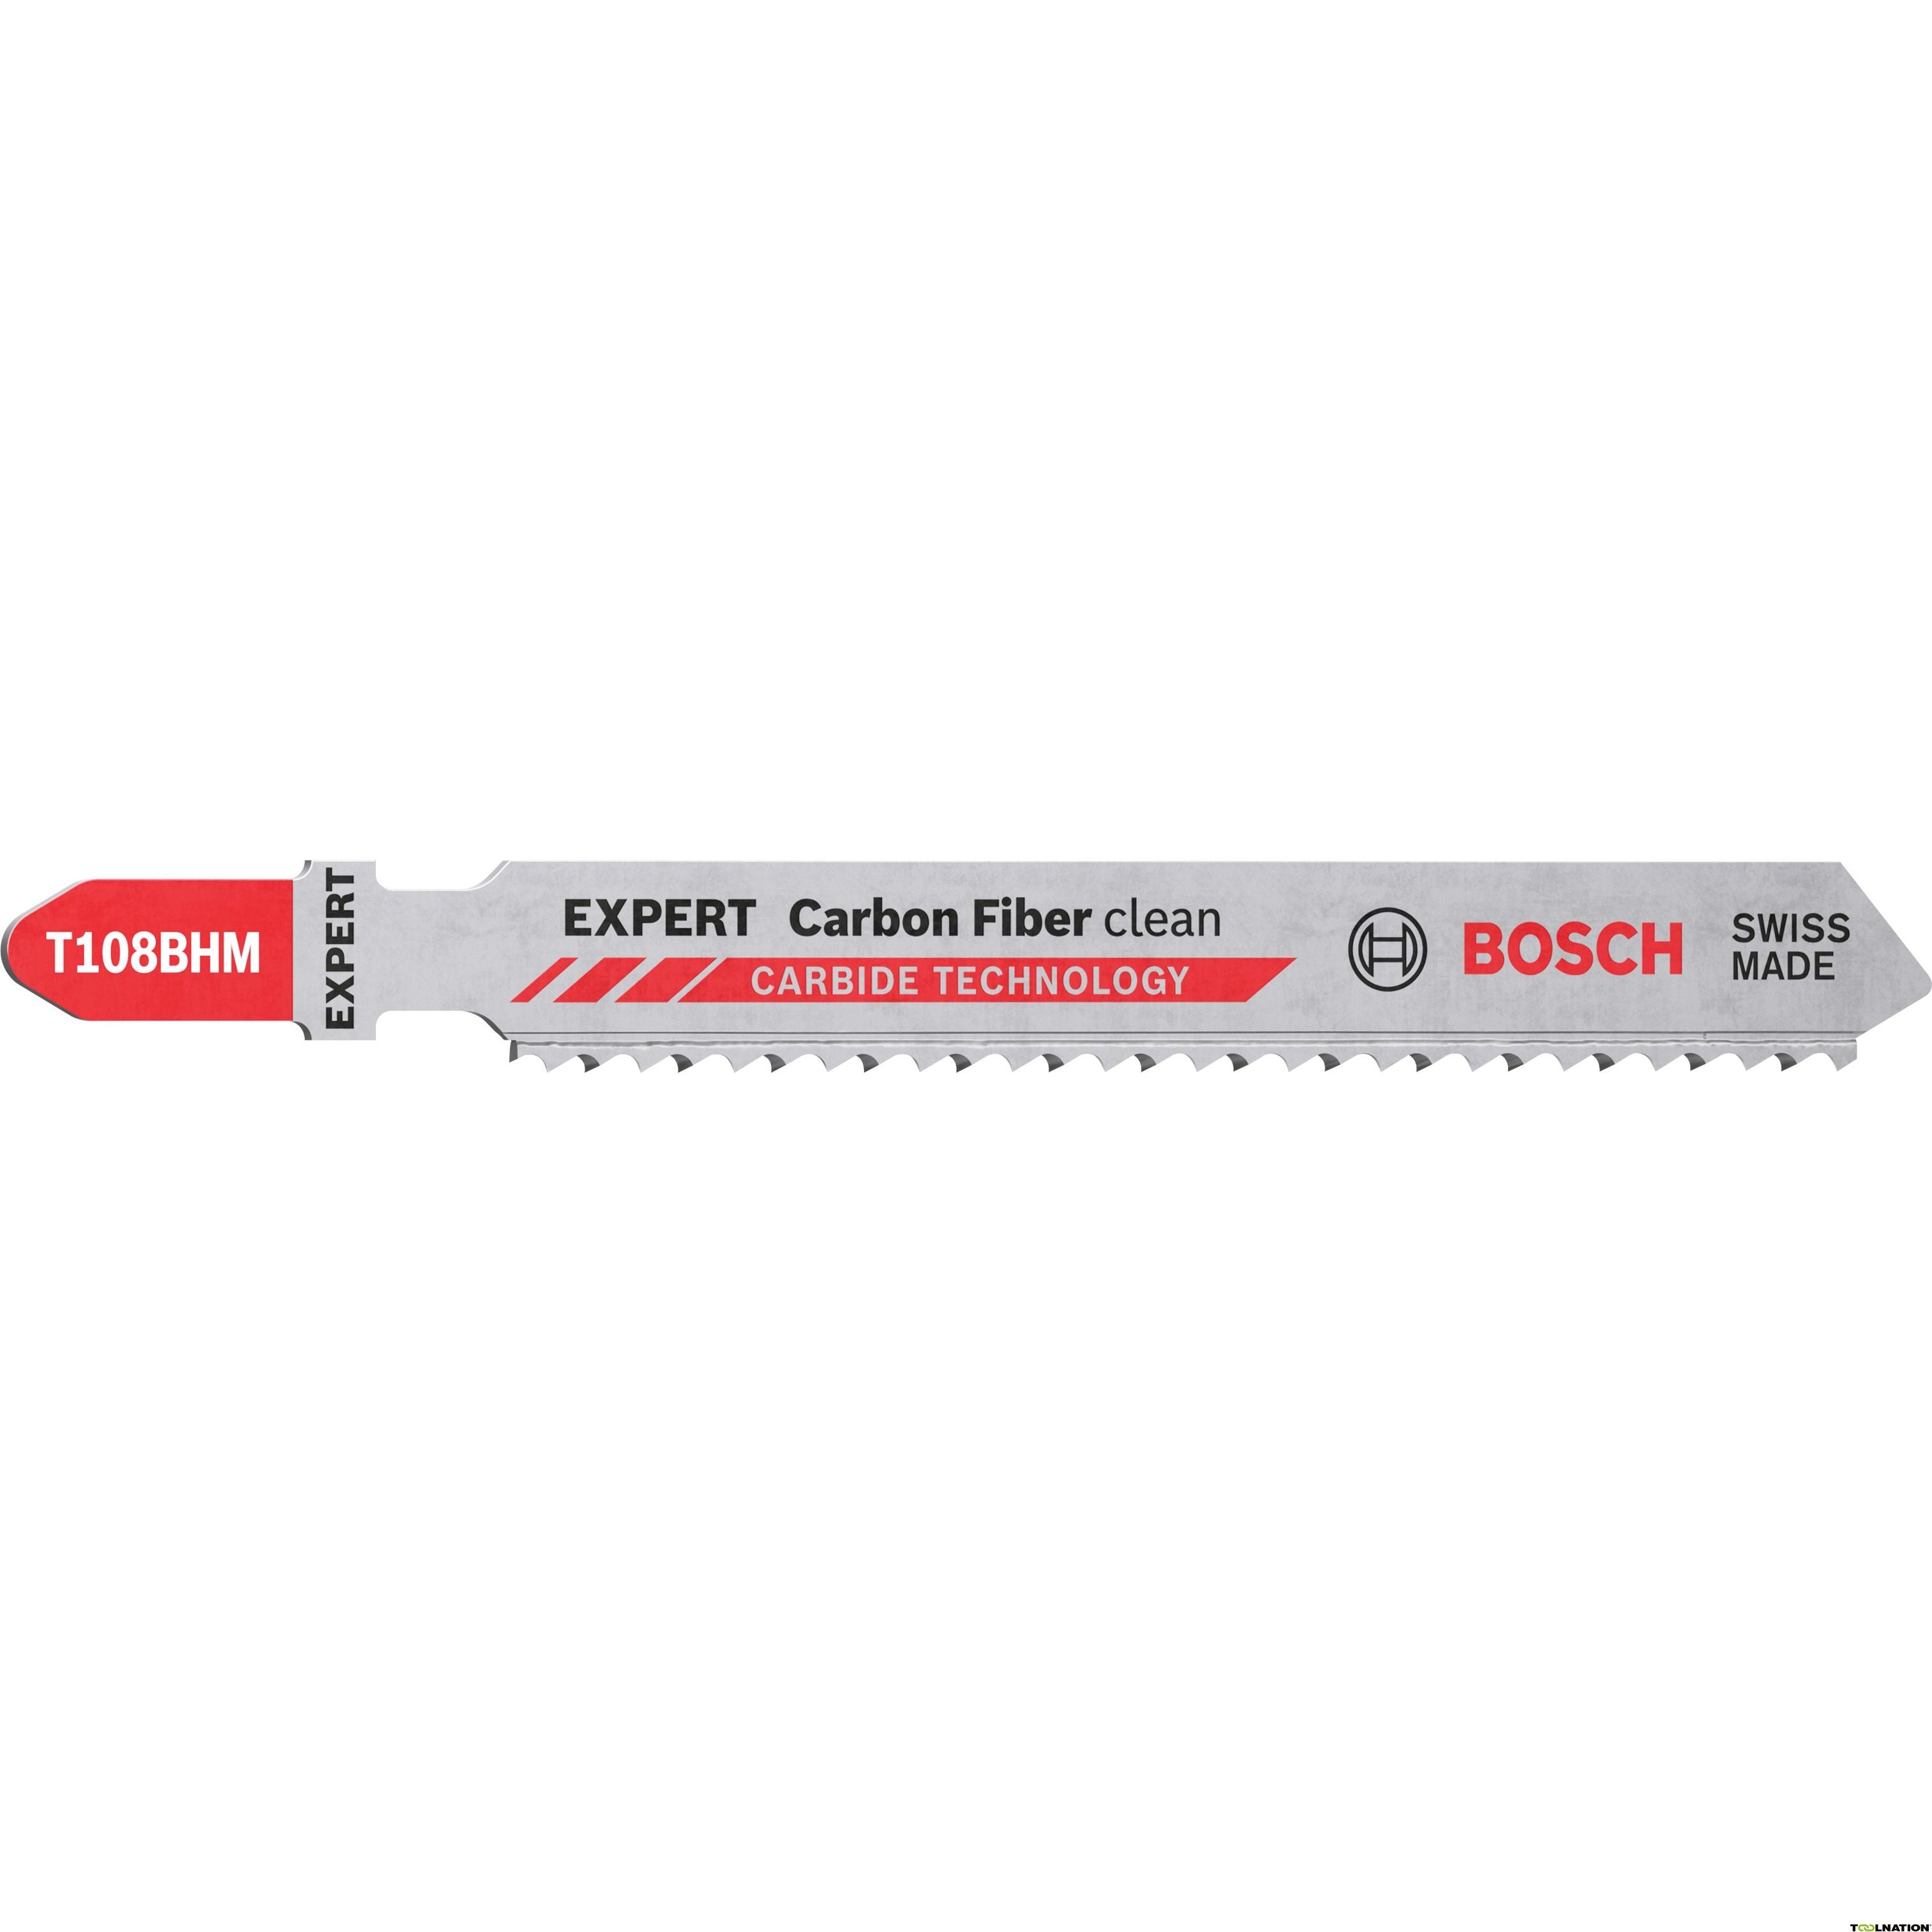 Bosch Jigsaw Blades  T 108 BHM Clean for Carbon Fiber, 3 Pack 2608900565 Power Tool Services